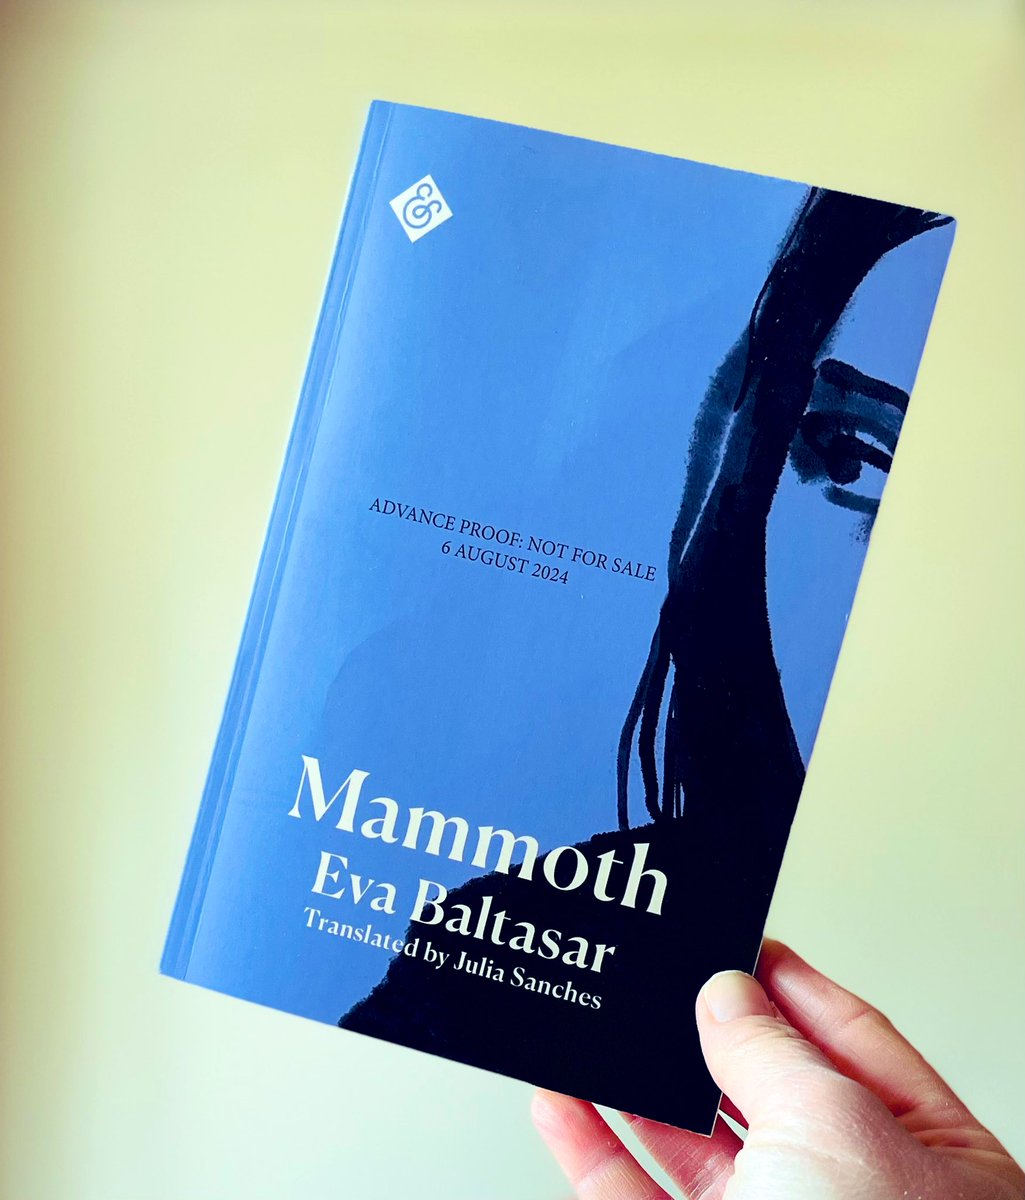 Thank you so much to Michael and @andothertweets for my proof copy of #Mammoth by #EvaBaltasar tr. by Julia Sanches which is out in August. I haven’t read any of Eva’s novels, but I know many of you love them, so am really looking forward to this one.